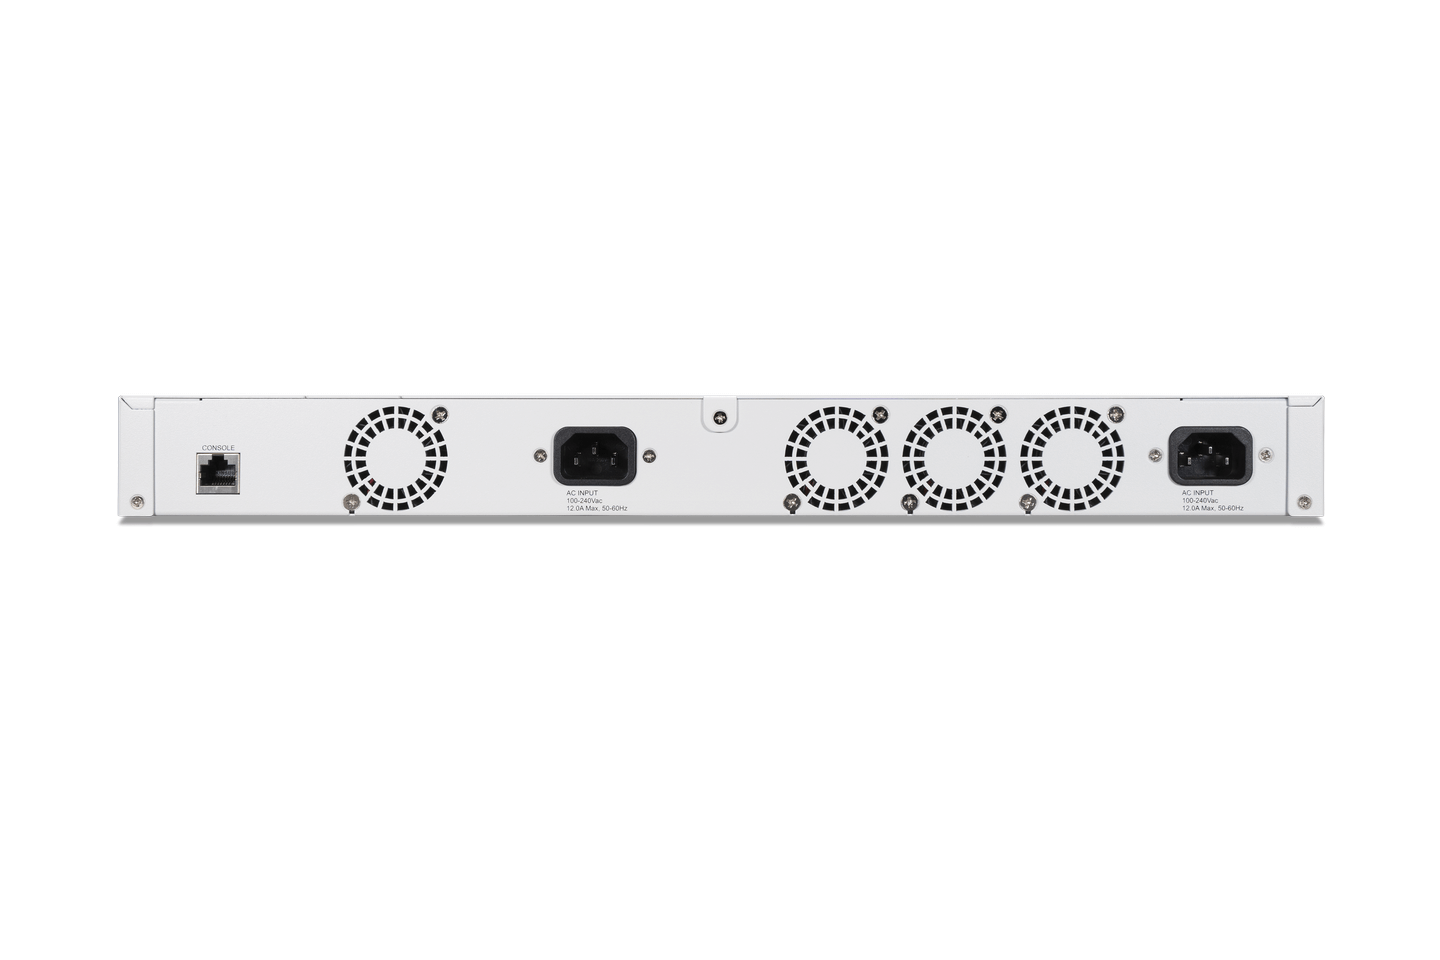 Fortinet FortiSwitch-448E-FPOE